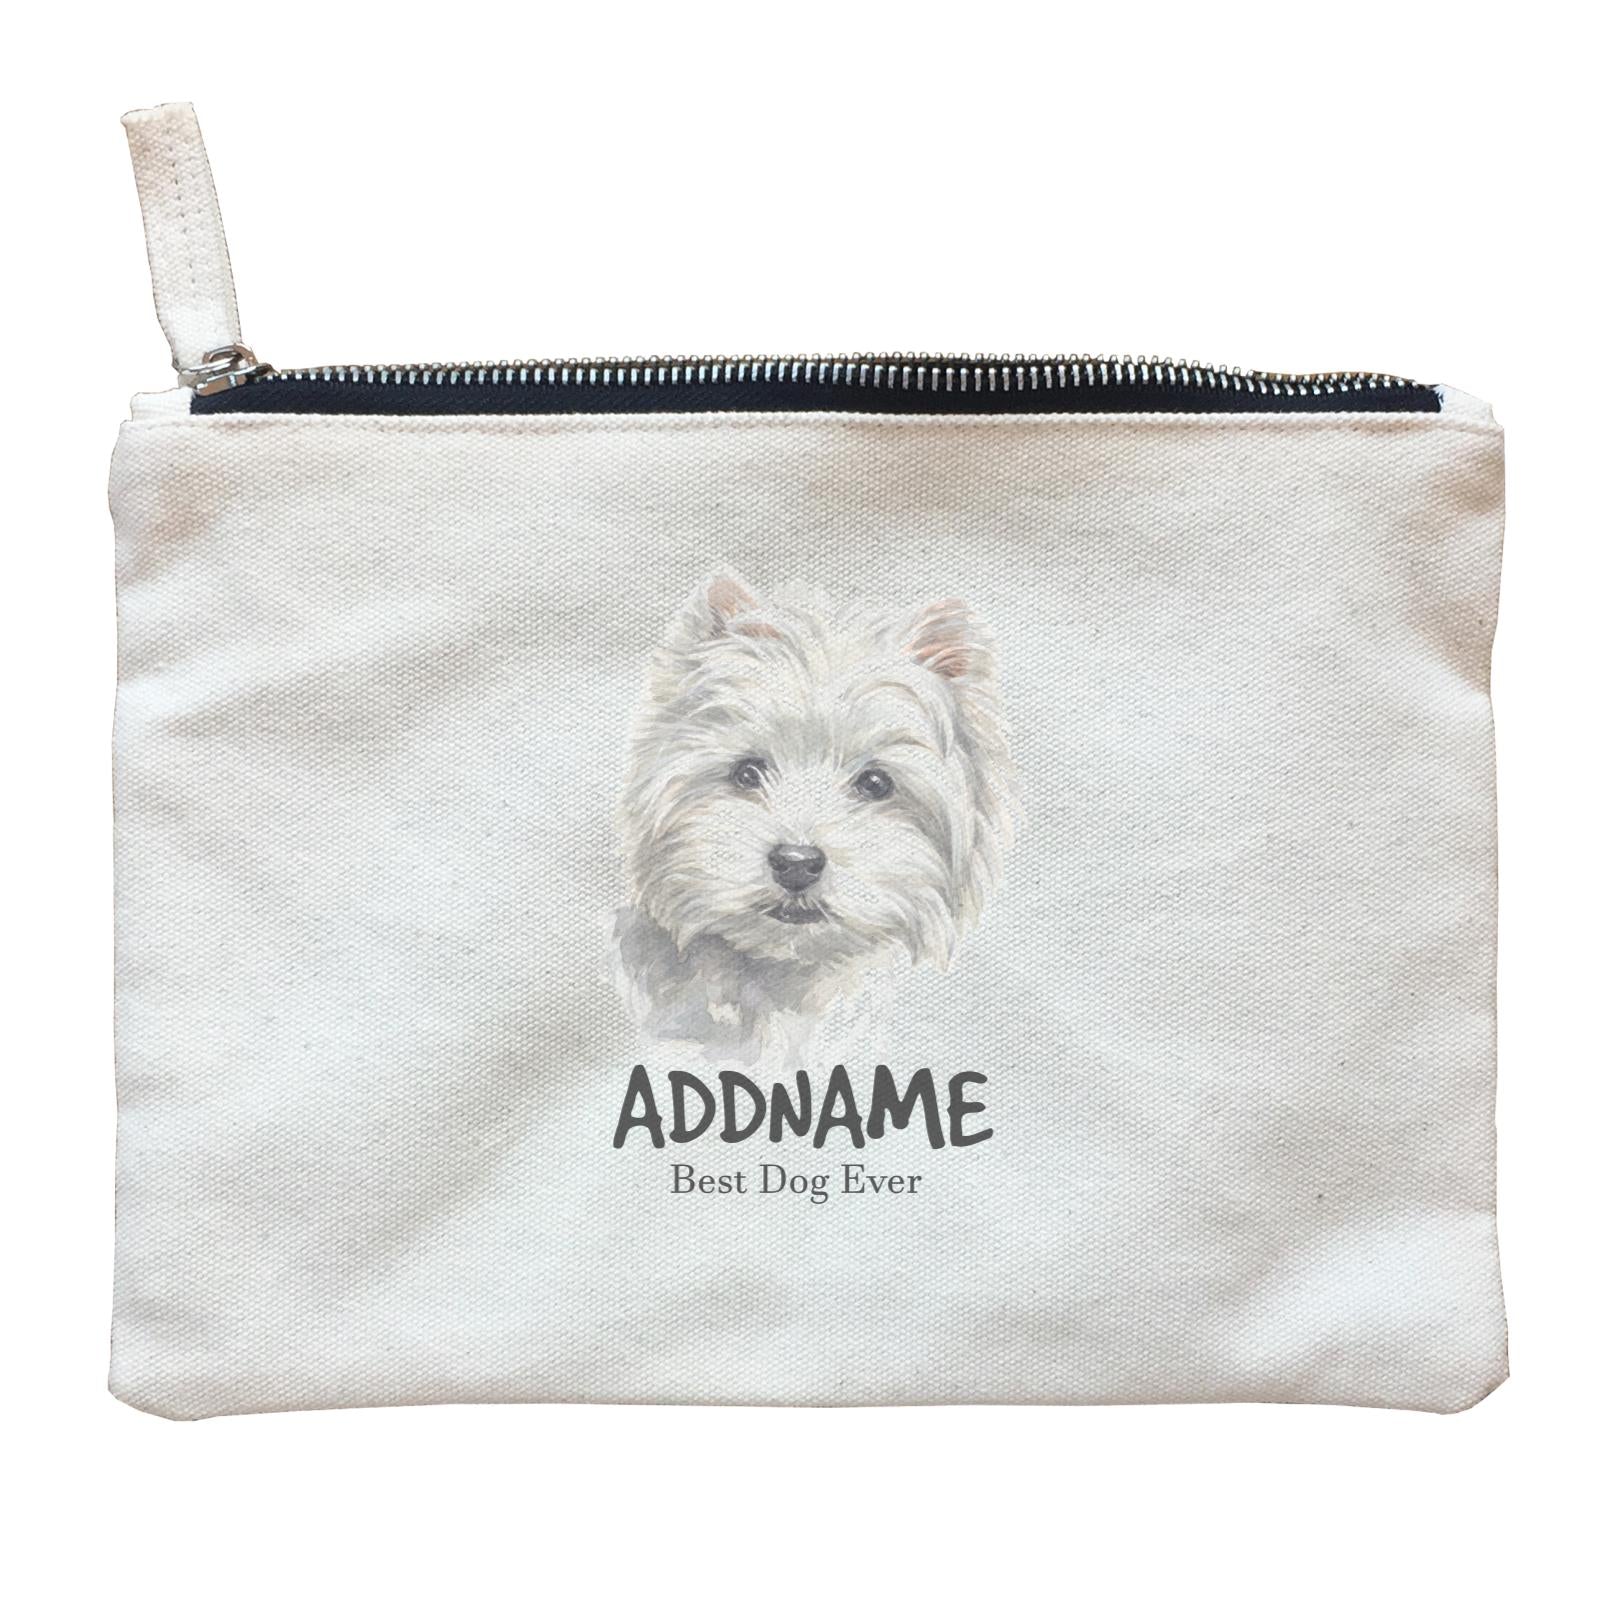 Watercolor Dog West Highland White Terrier Small Best Dog Ever Addname Zipper Pouch